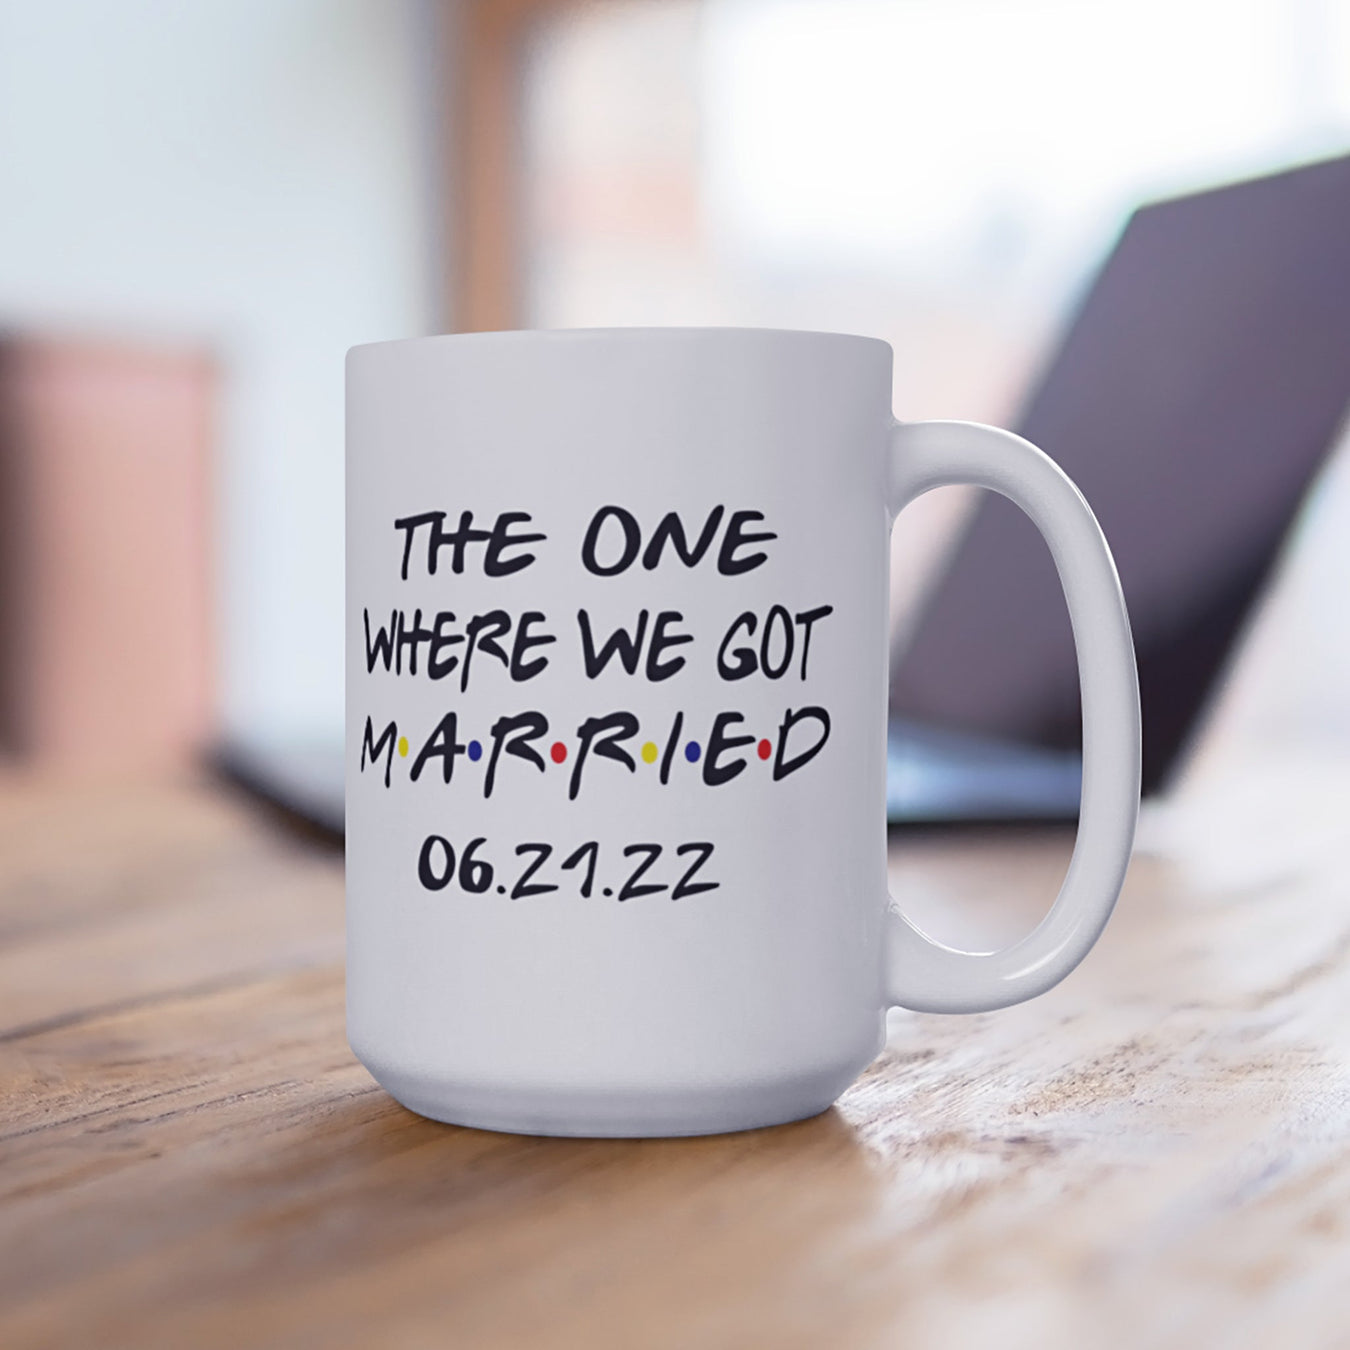 A mug that reads "The One Where We Got Married 06.21.22" sits on a wooden table with a laptop seen in the background.